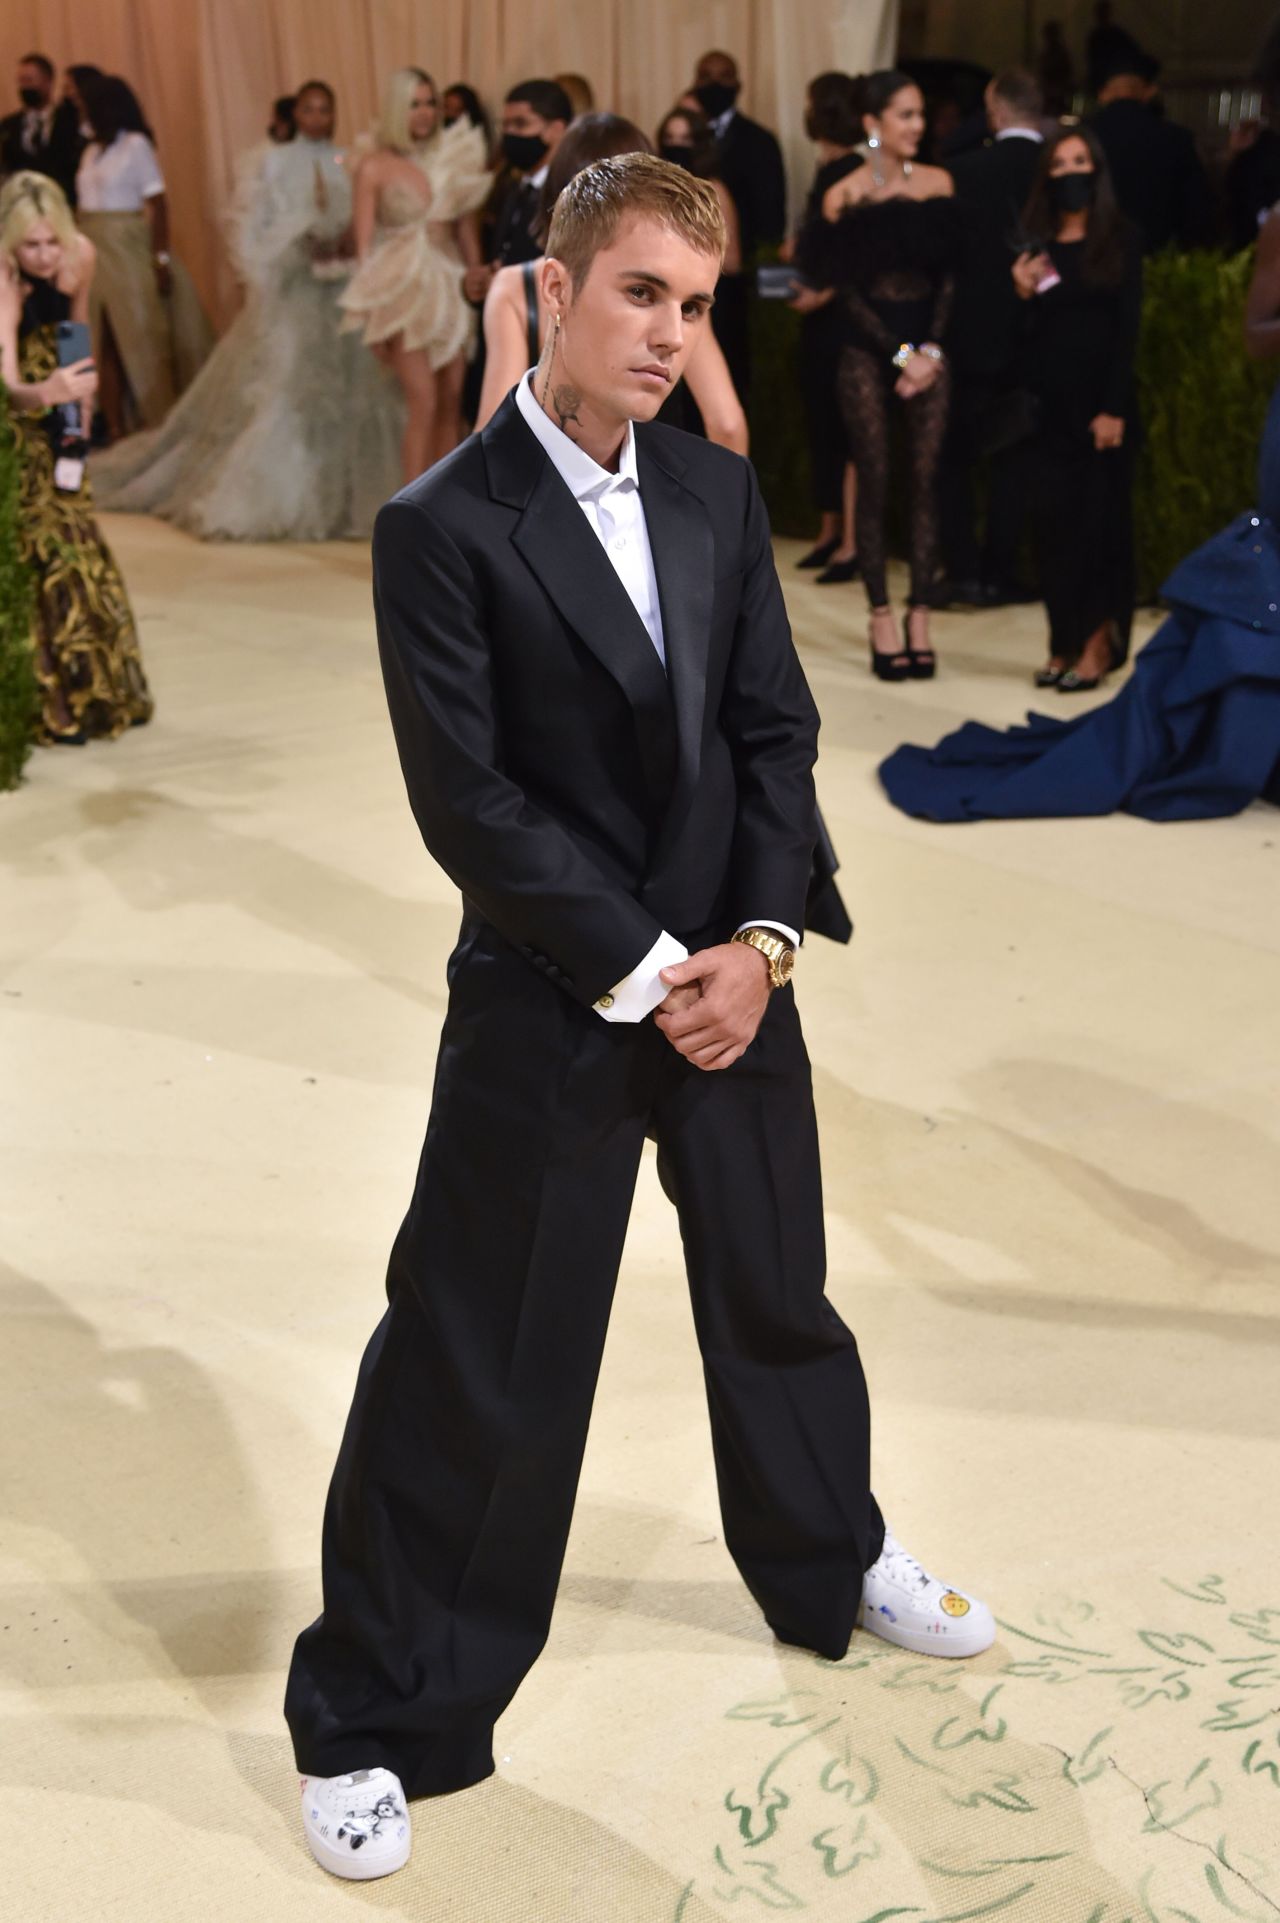 Justin Bieber, who attended with his wife Hailey, opted for a streamlined black and white evening look by his own fashion line Drew House. He was also seen carrying a bag from the label to the Met Gala and wore Air Force 1 sneakers, customized with Drew House branding.